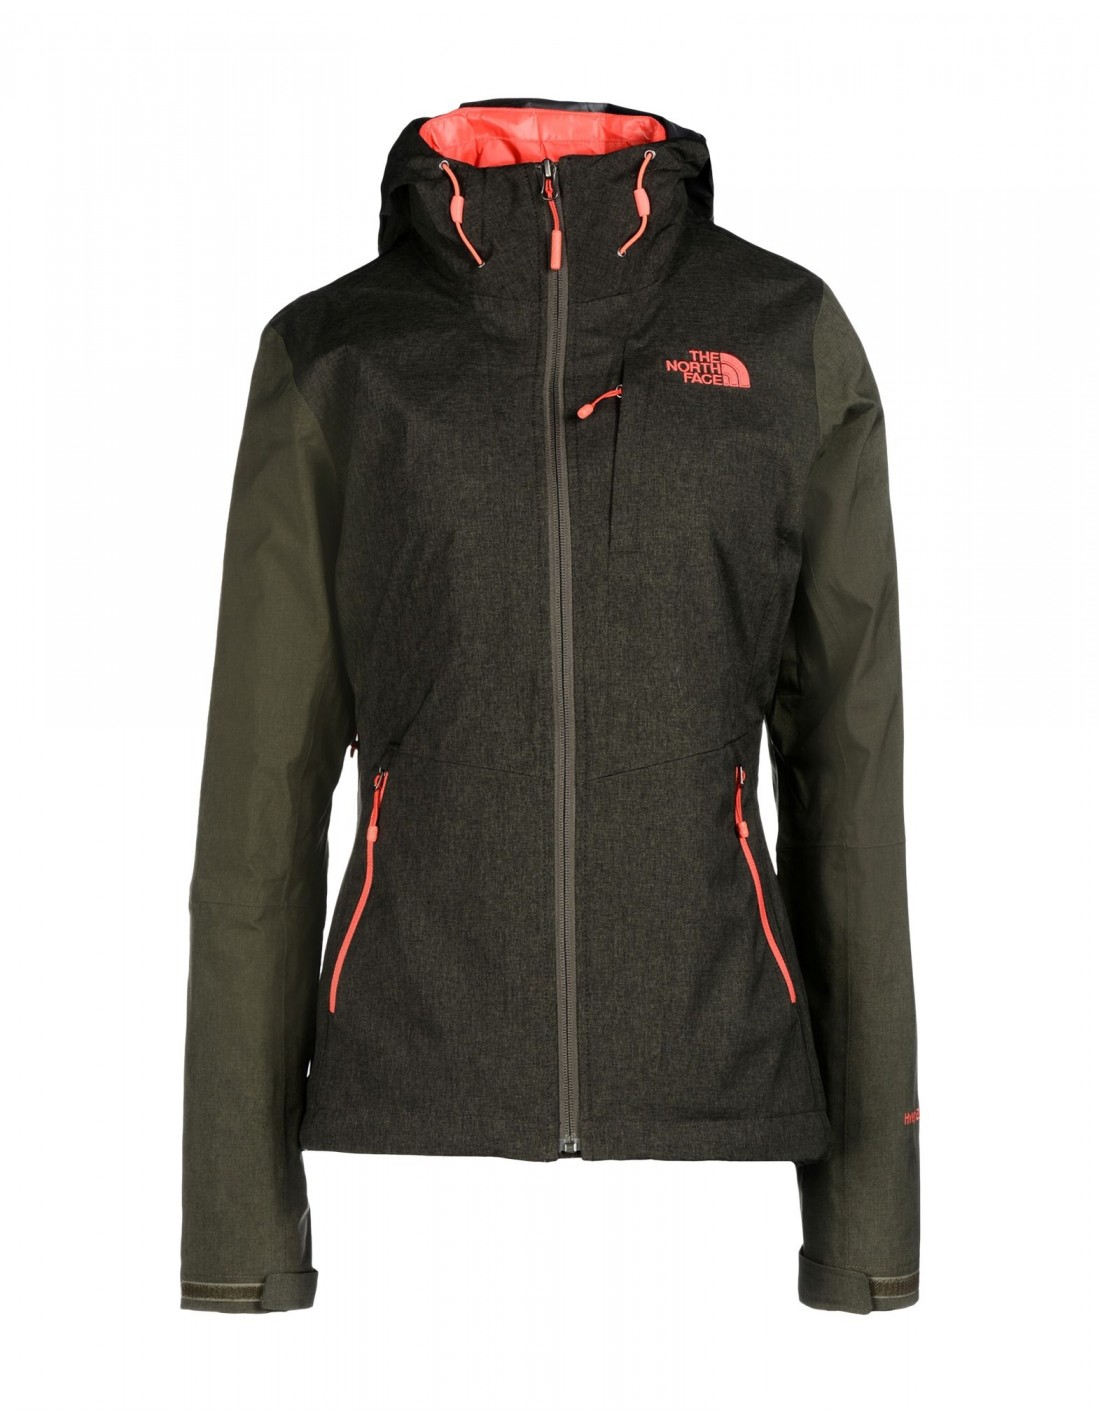 blouson the north face triclimate femme 